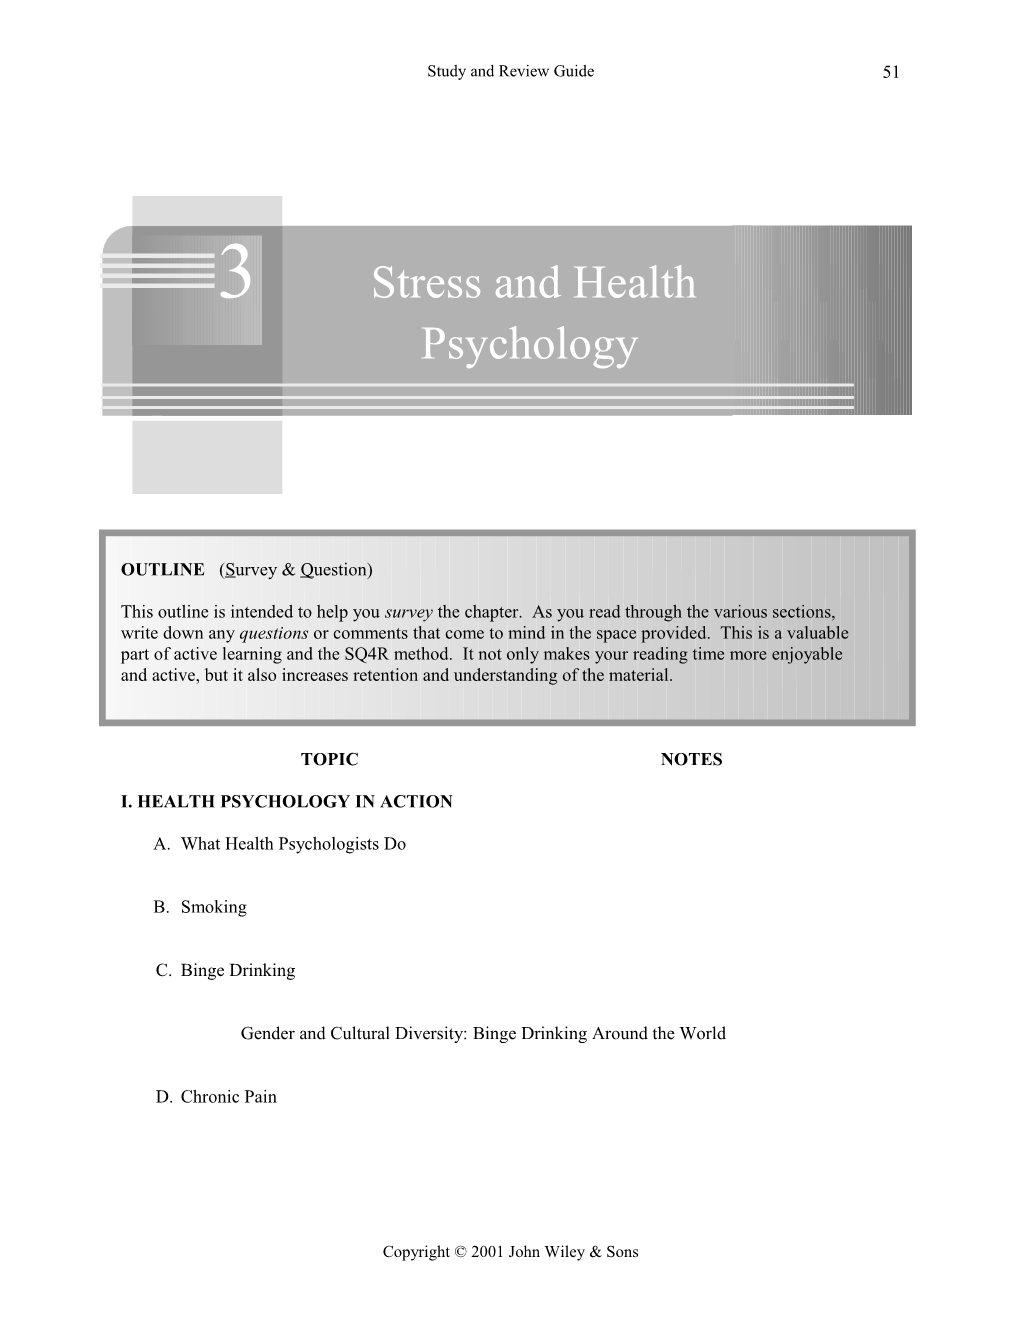 3 Stress and Health Psychology